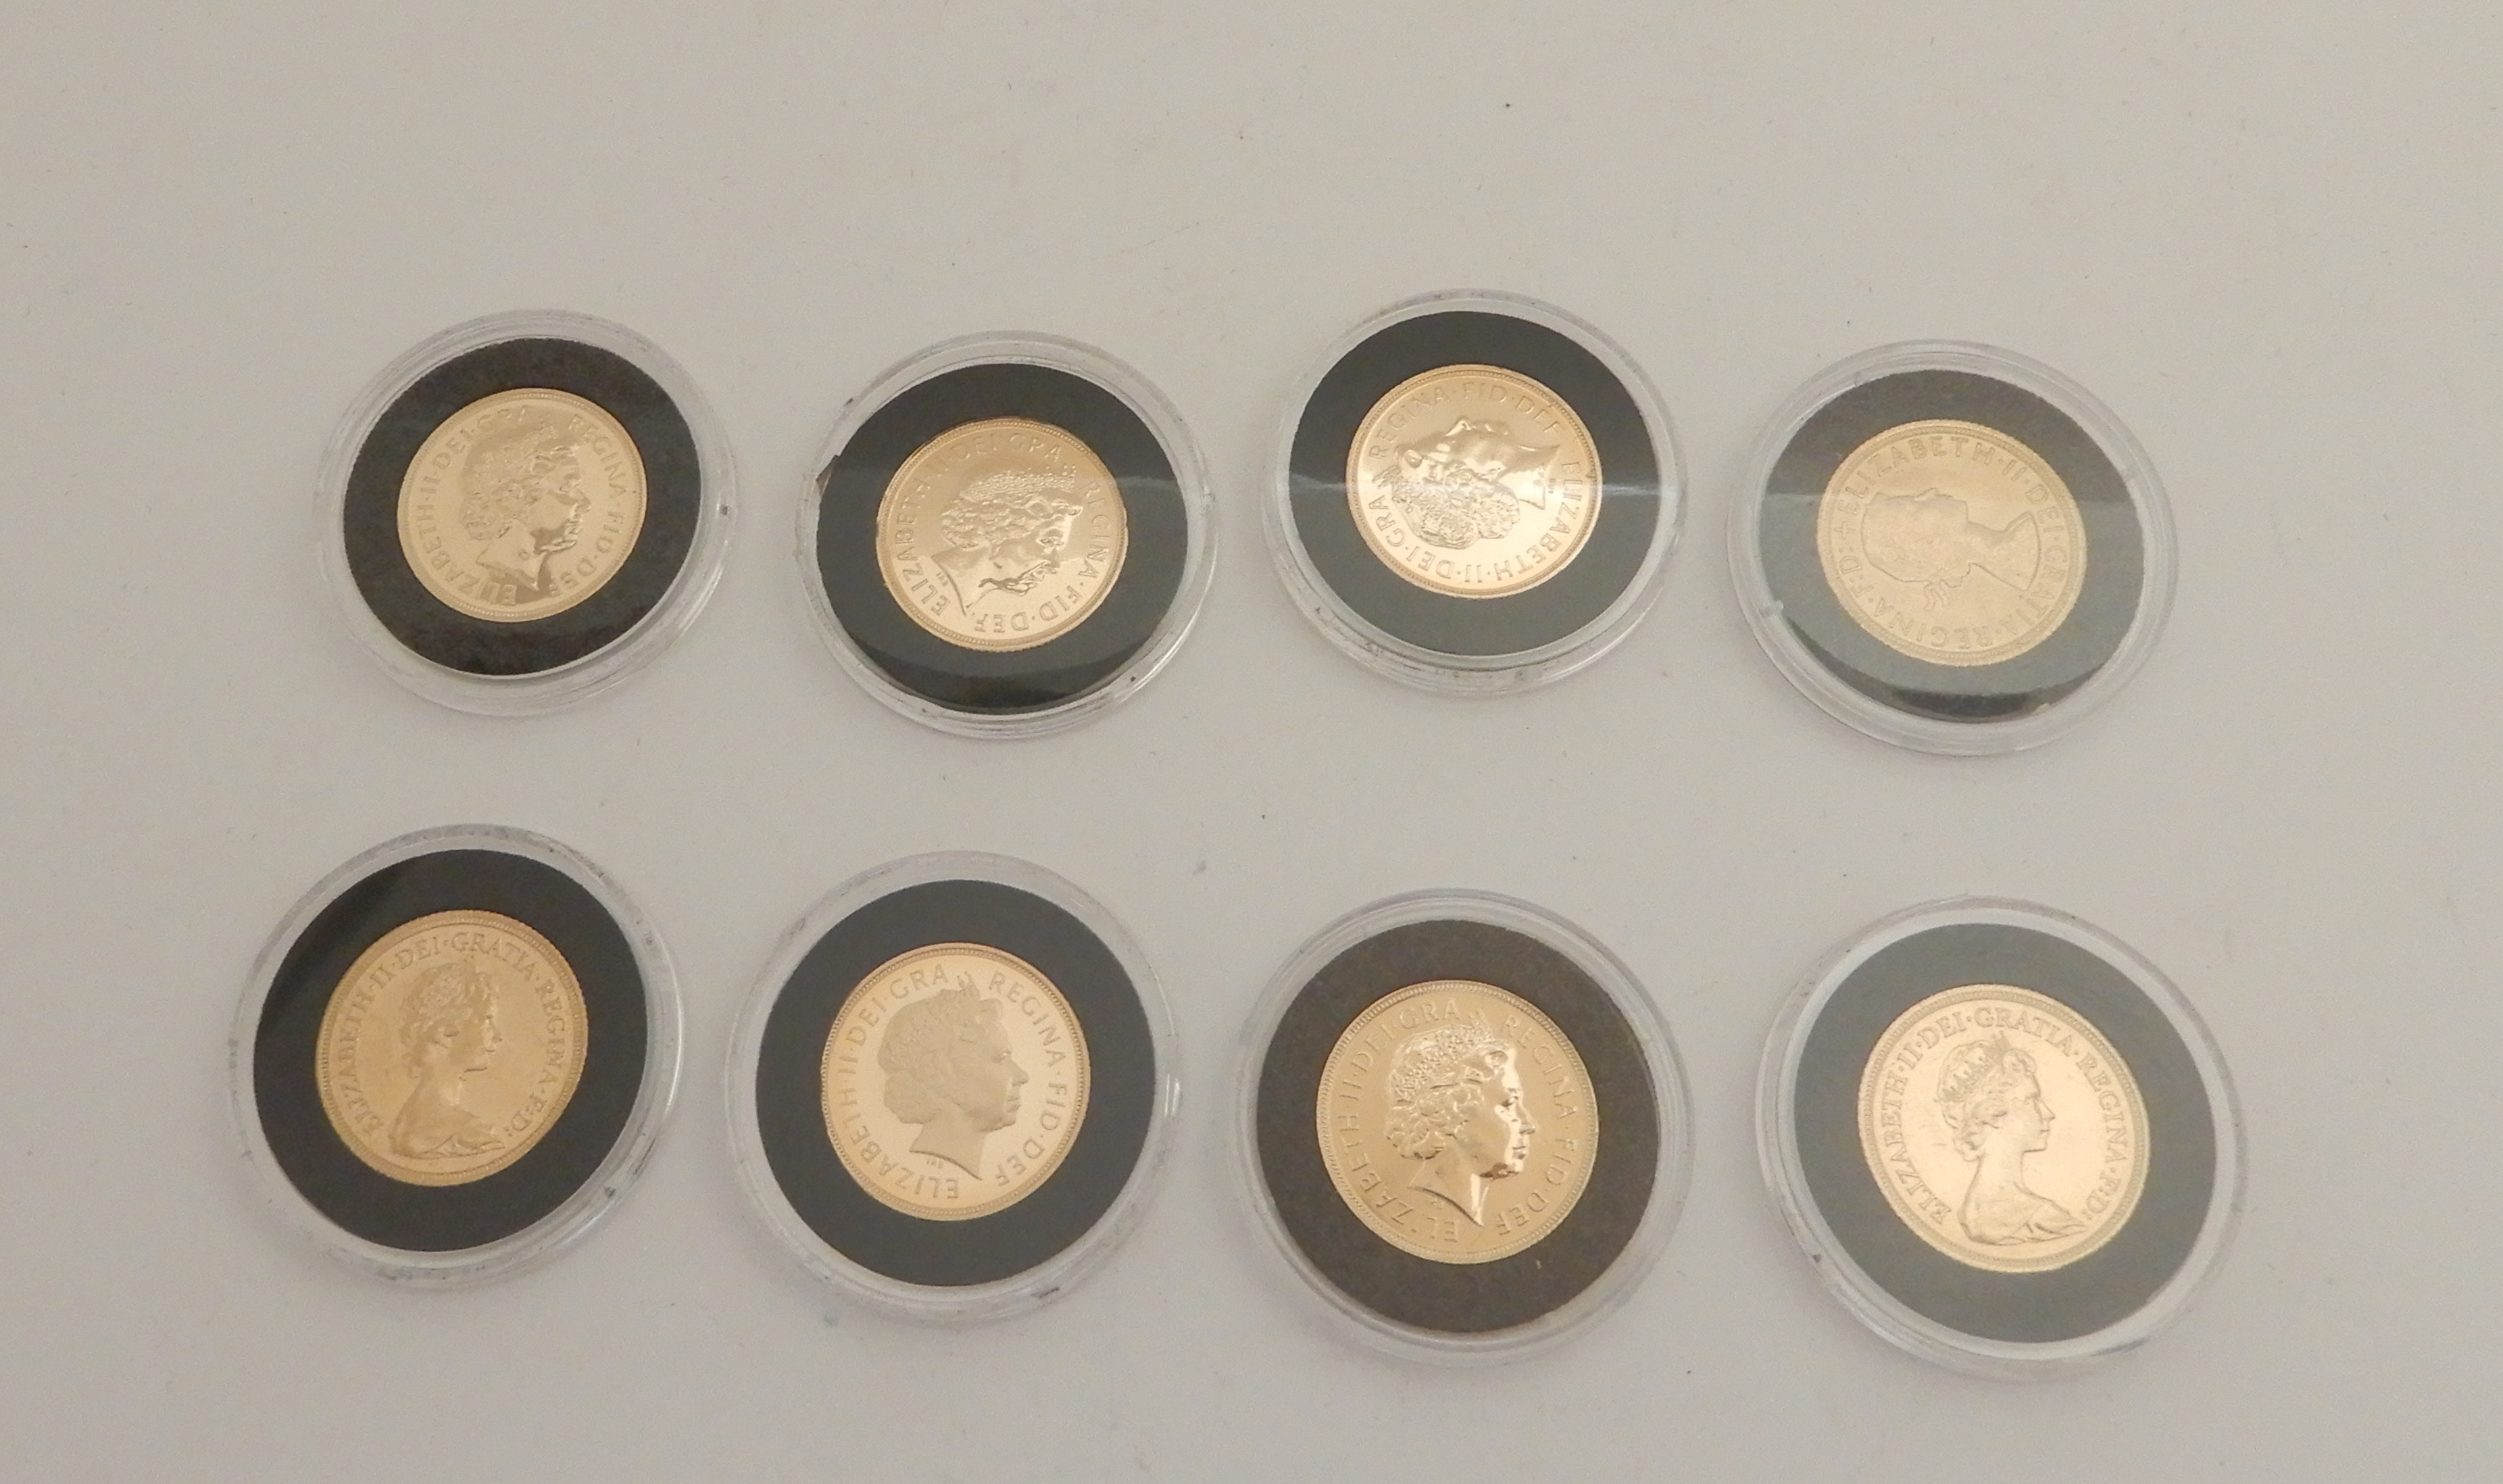 EIGHT QUEEN ELIZABETH II GOLD FULL SOVEREIGNS (ENCAPSULATED) 1968, 1979 (2), 2002 (2), 2003, 2005 ( - Image 3 of 3